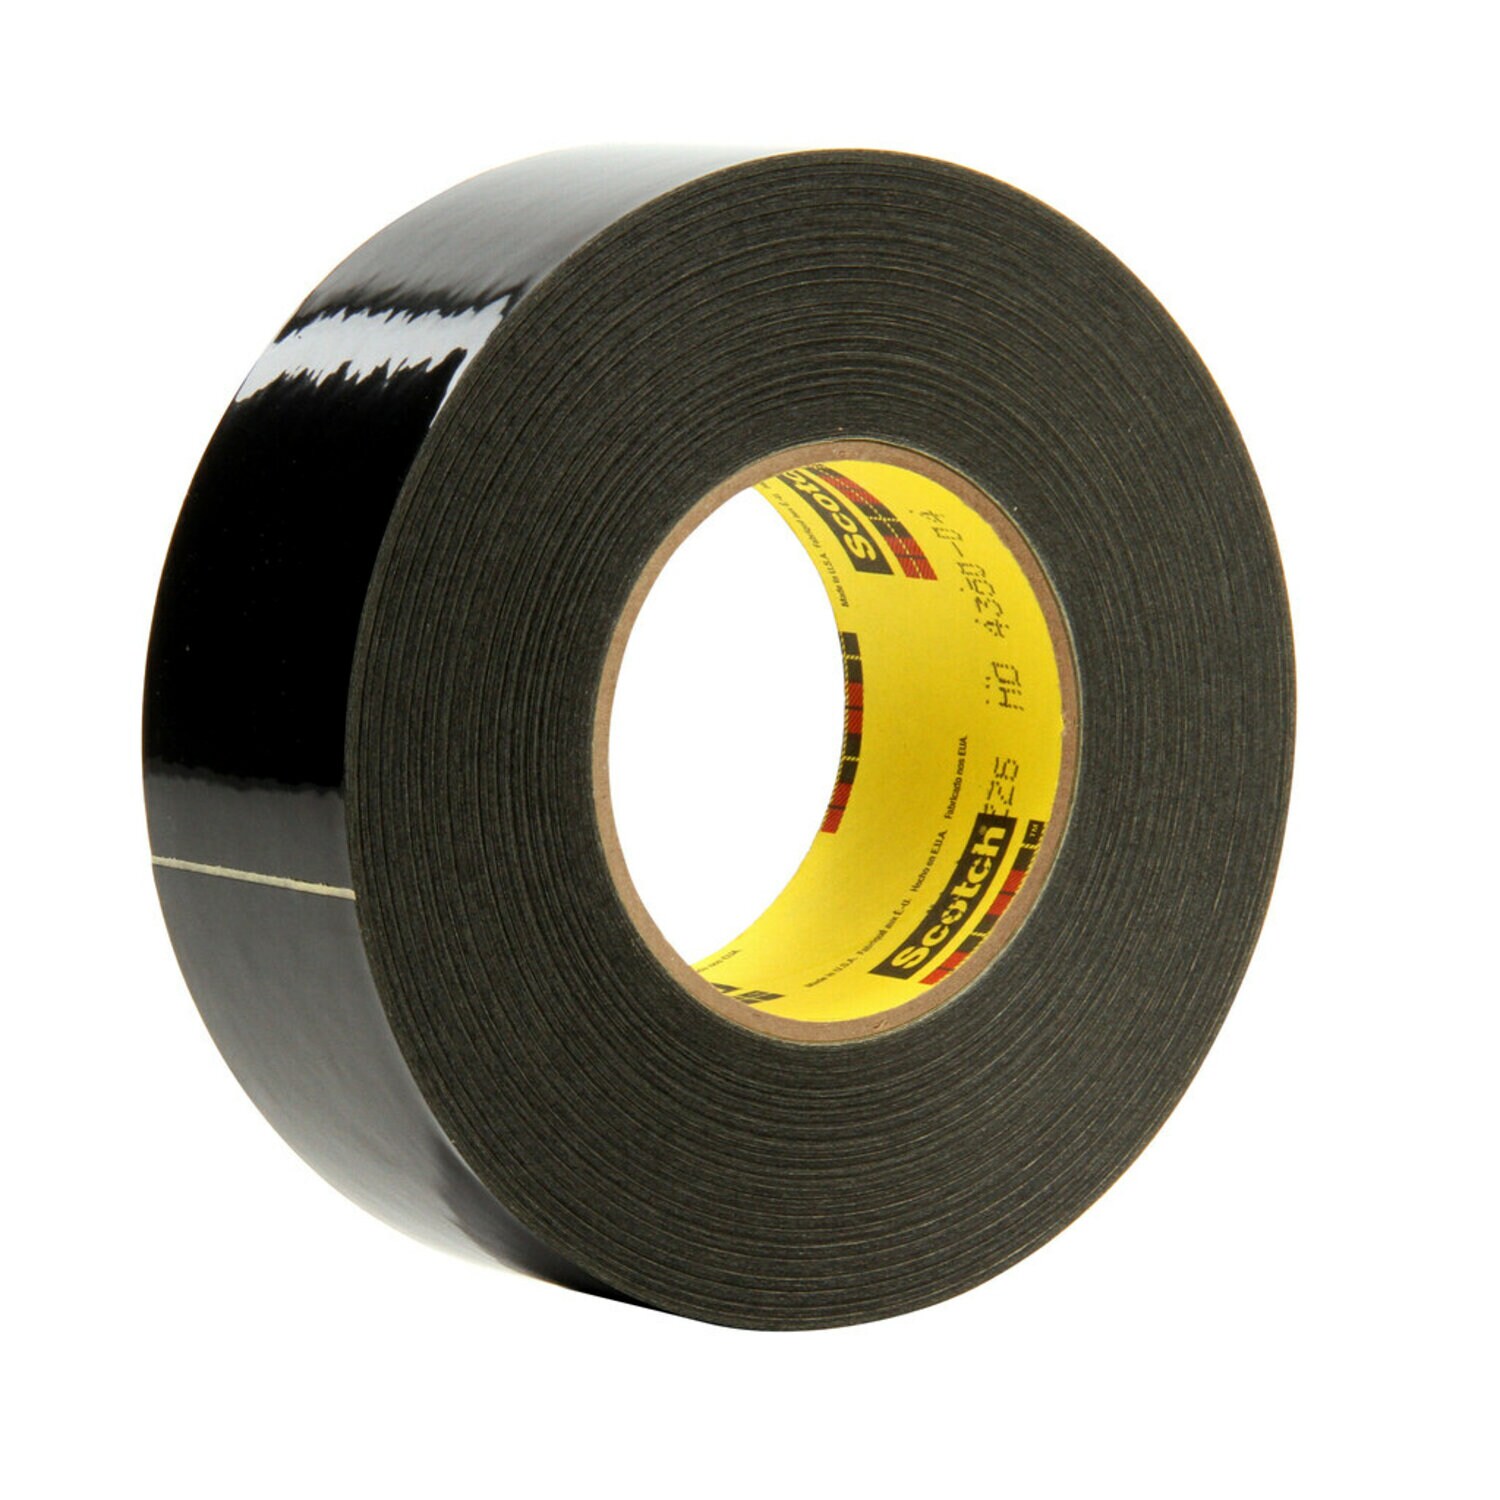 3M - 06506 - Scotch Steel Gray Masking Paper, 6 in x 1000 ft